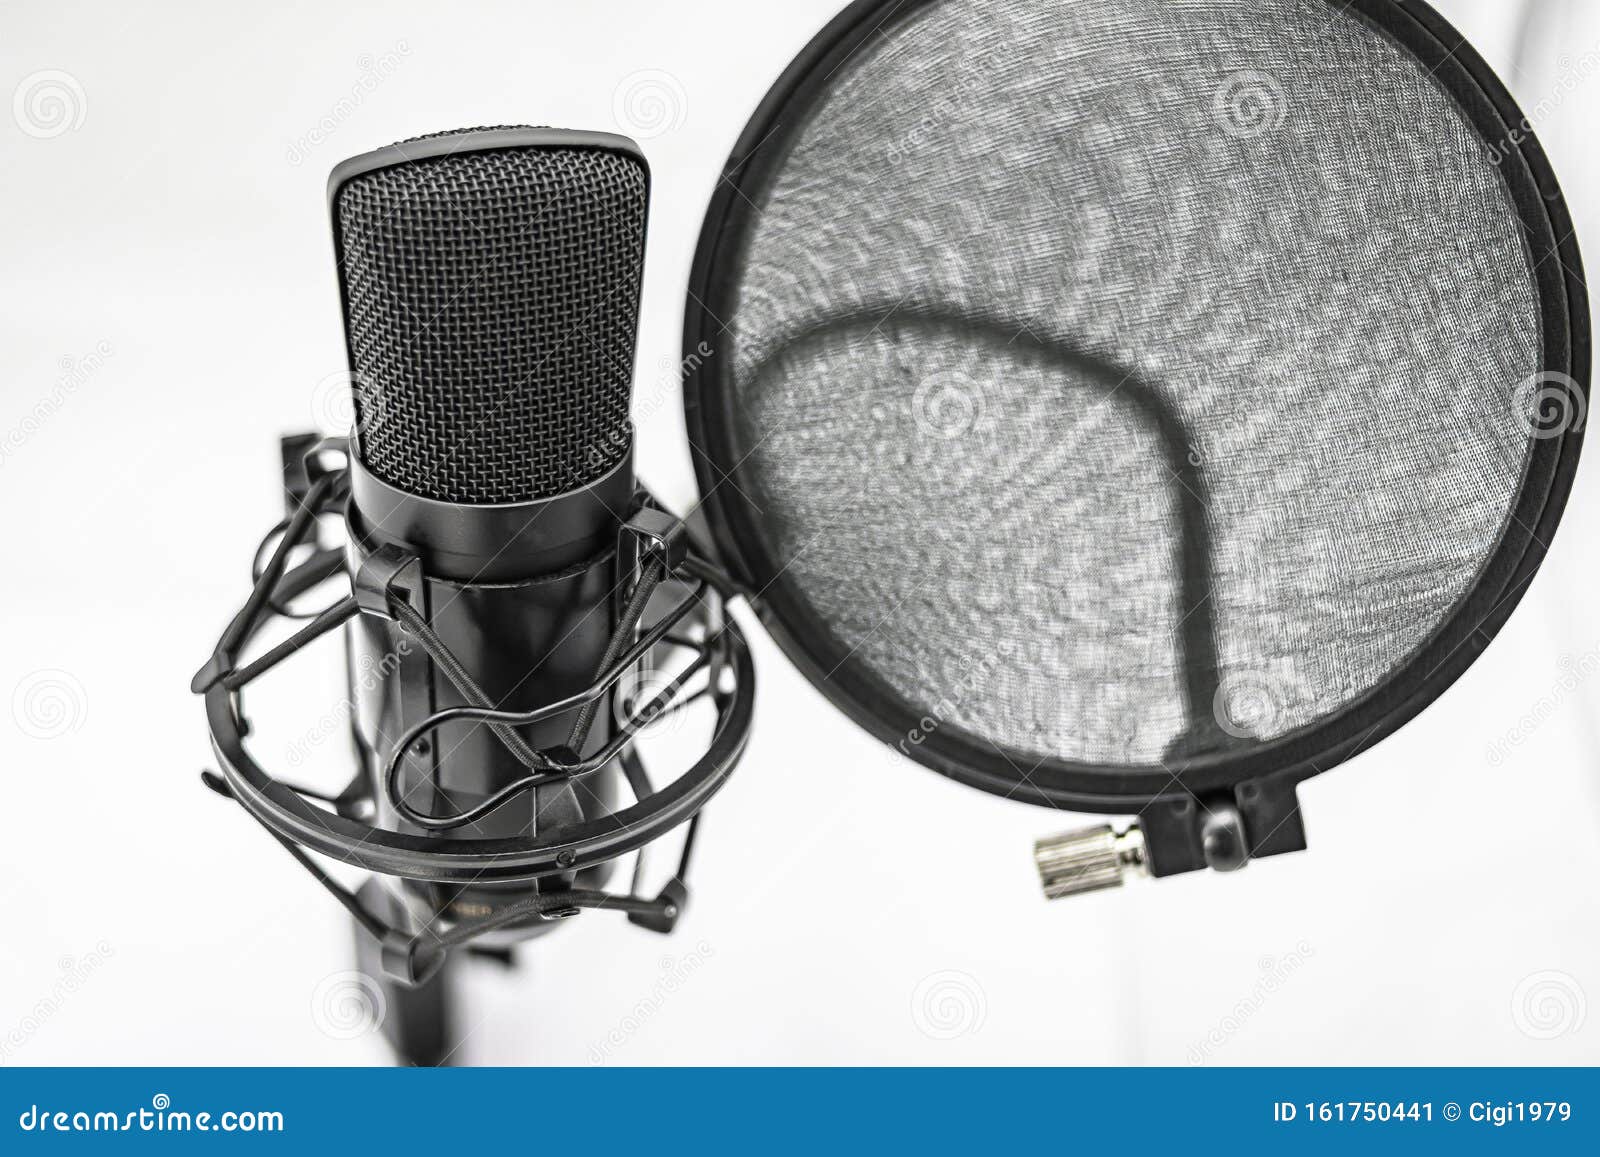 condenser microphone with spider holder and antipop filter